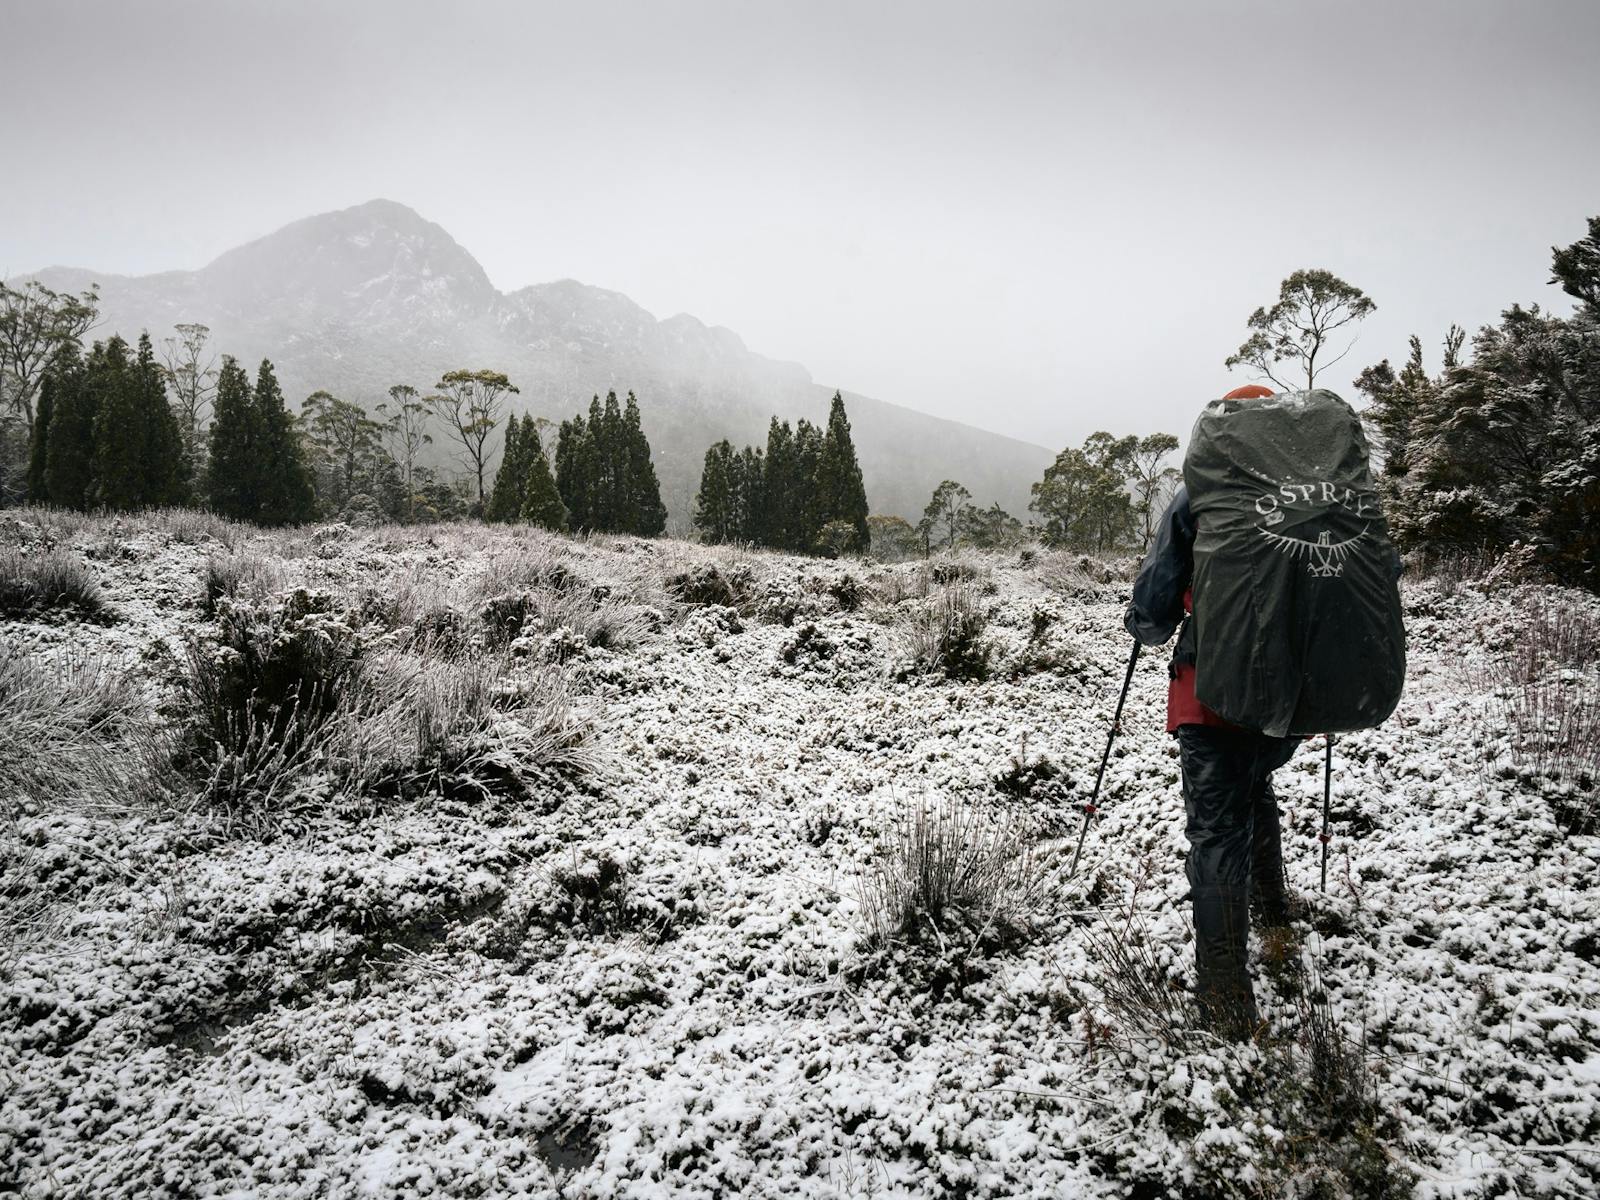 Guided winter walks on the Overland Track